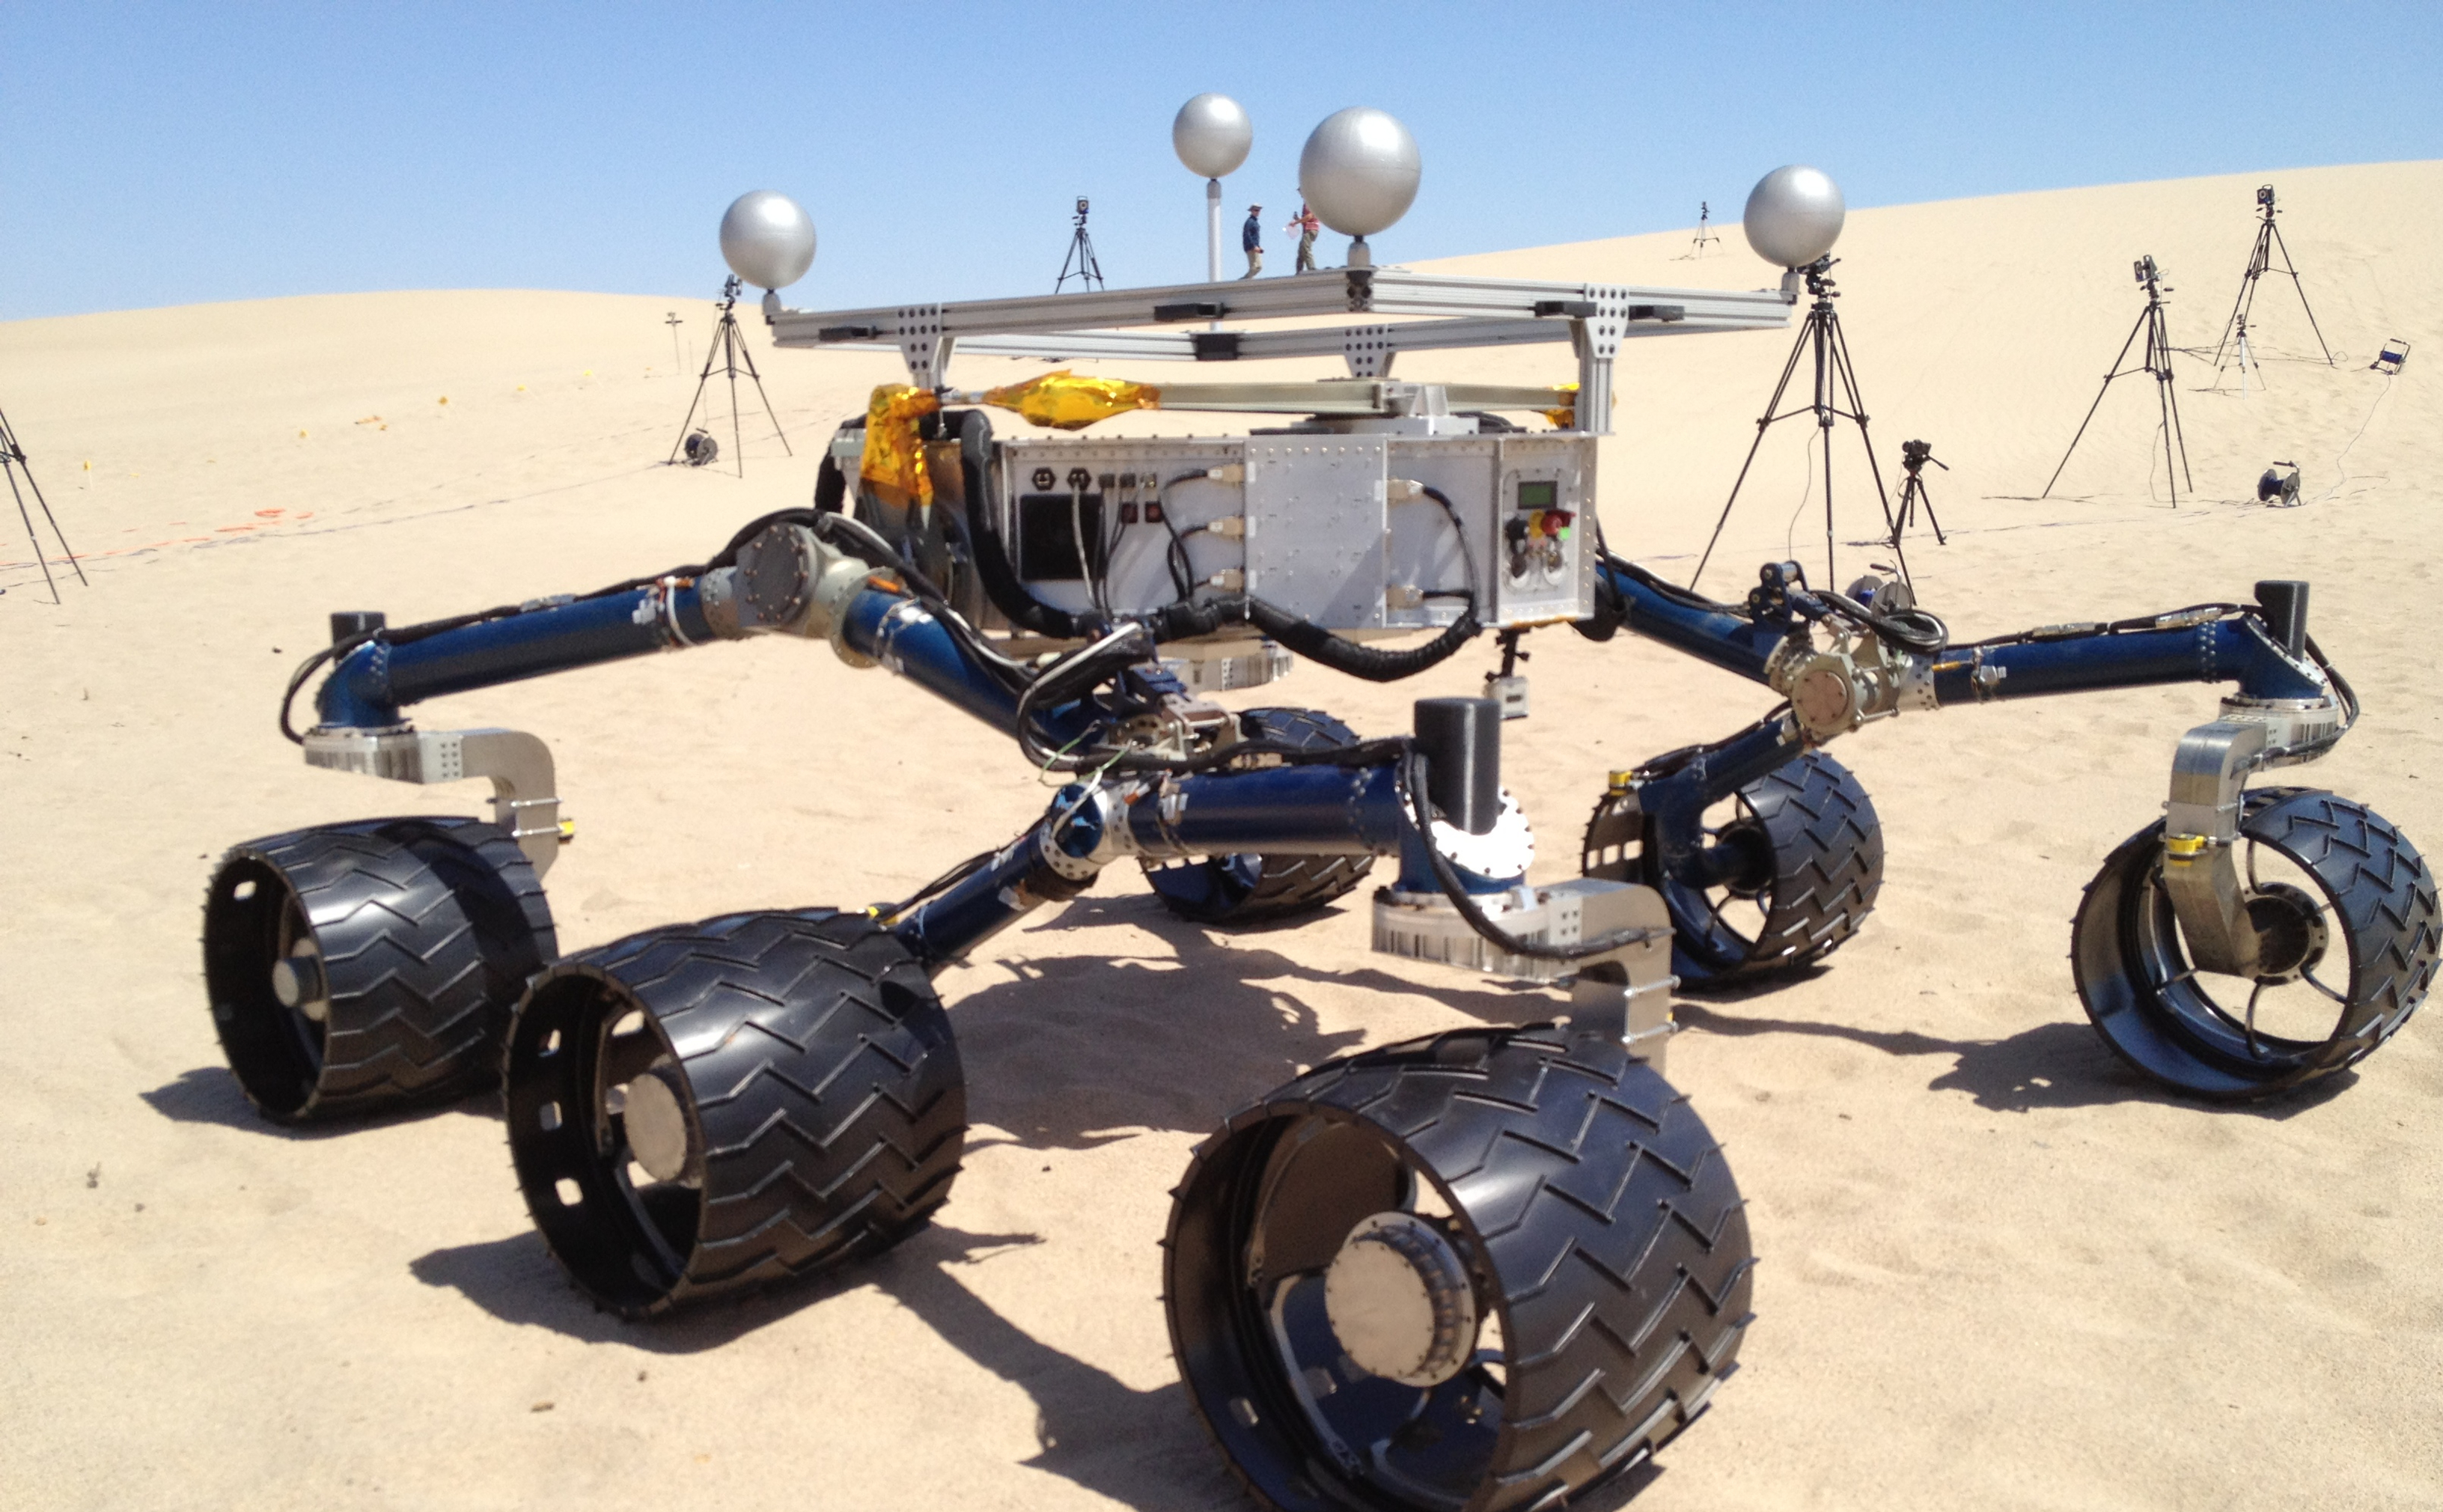 Test Rover Aids Preparations in California for Curiosity Rover on Mars